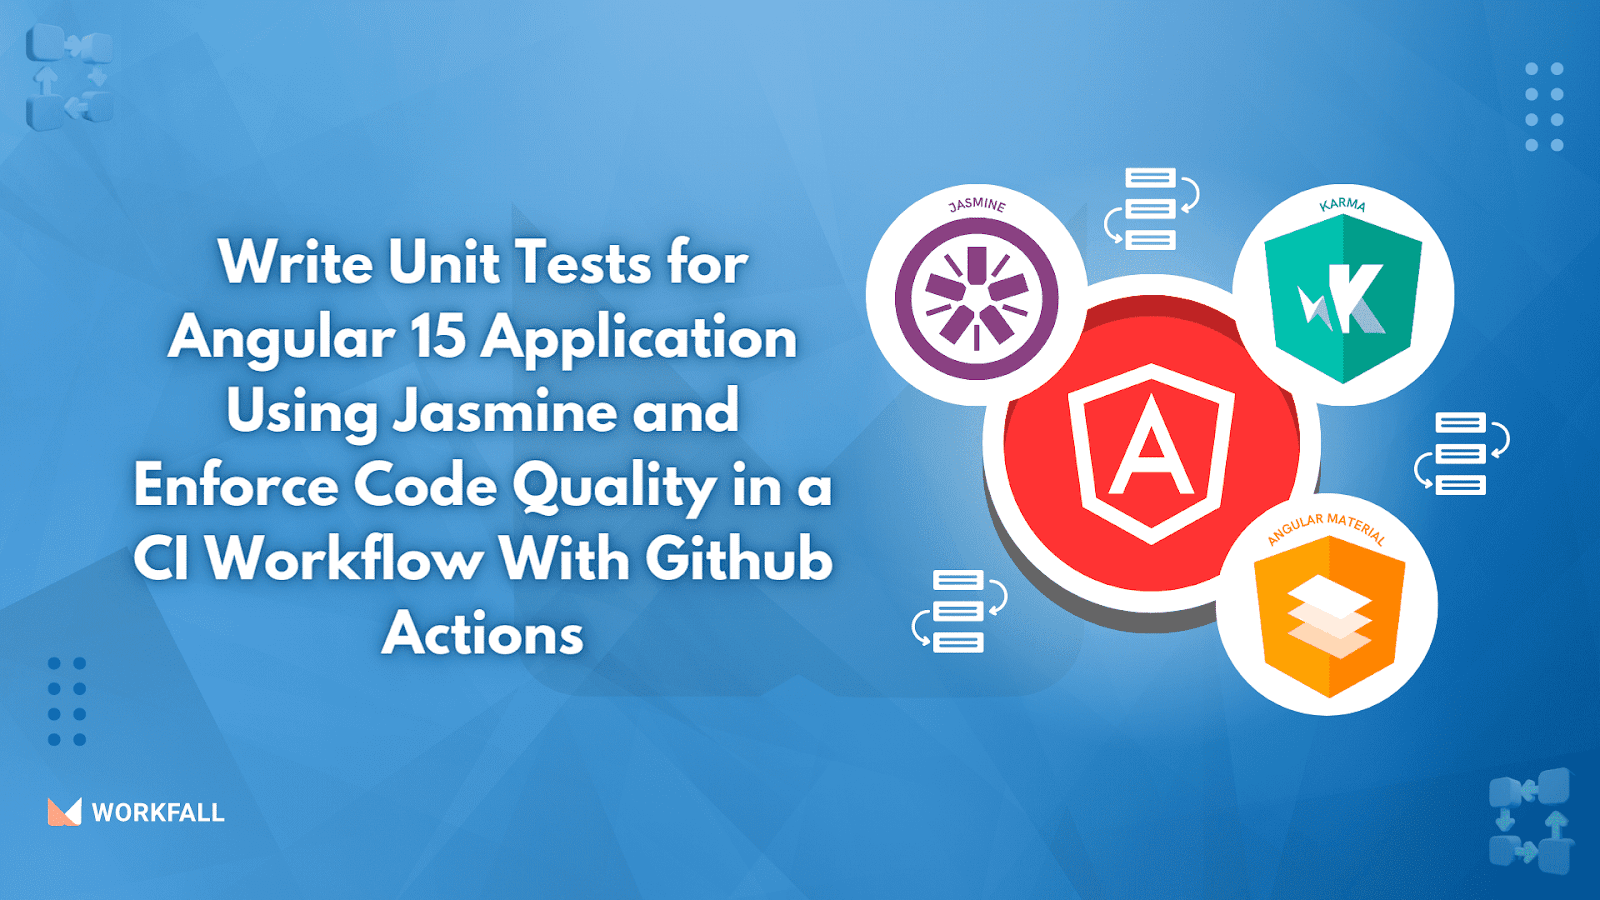 Unit Tests for Angular 15 Application Using Jasmine and Enforce Code Quality in a CI Workflow With Github Actions